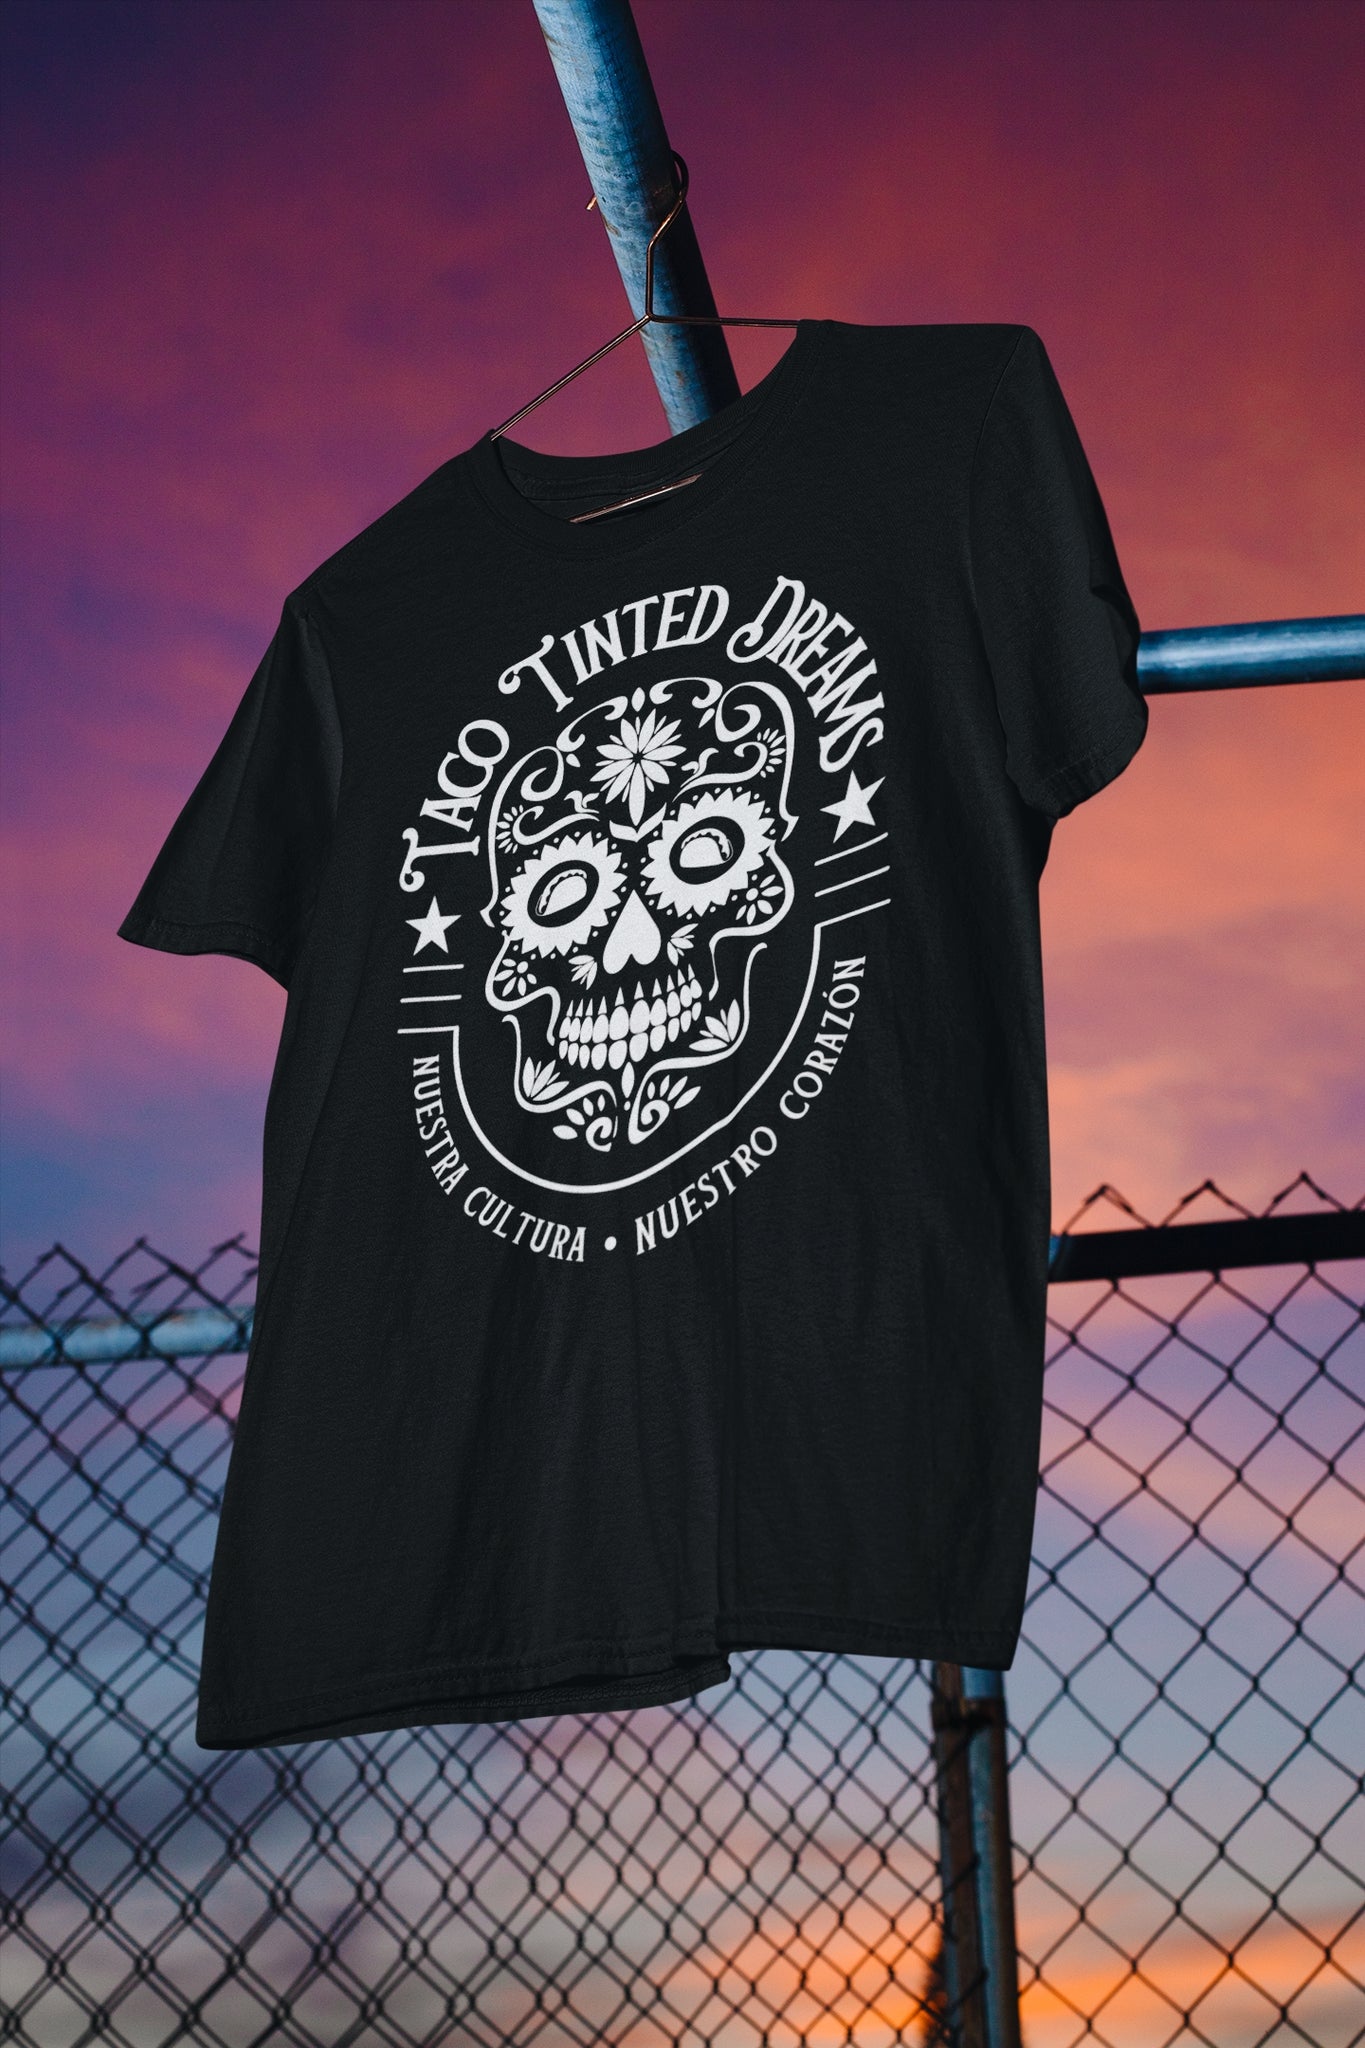 tattoo-style Mexican sugar skull logo with text "taco tinted dreams" and "nuestra cultura, nuestro corazón" on a black t-shirt